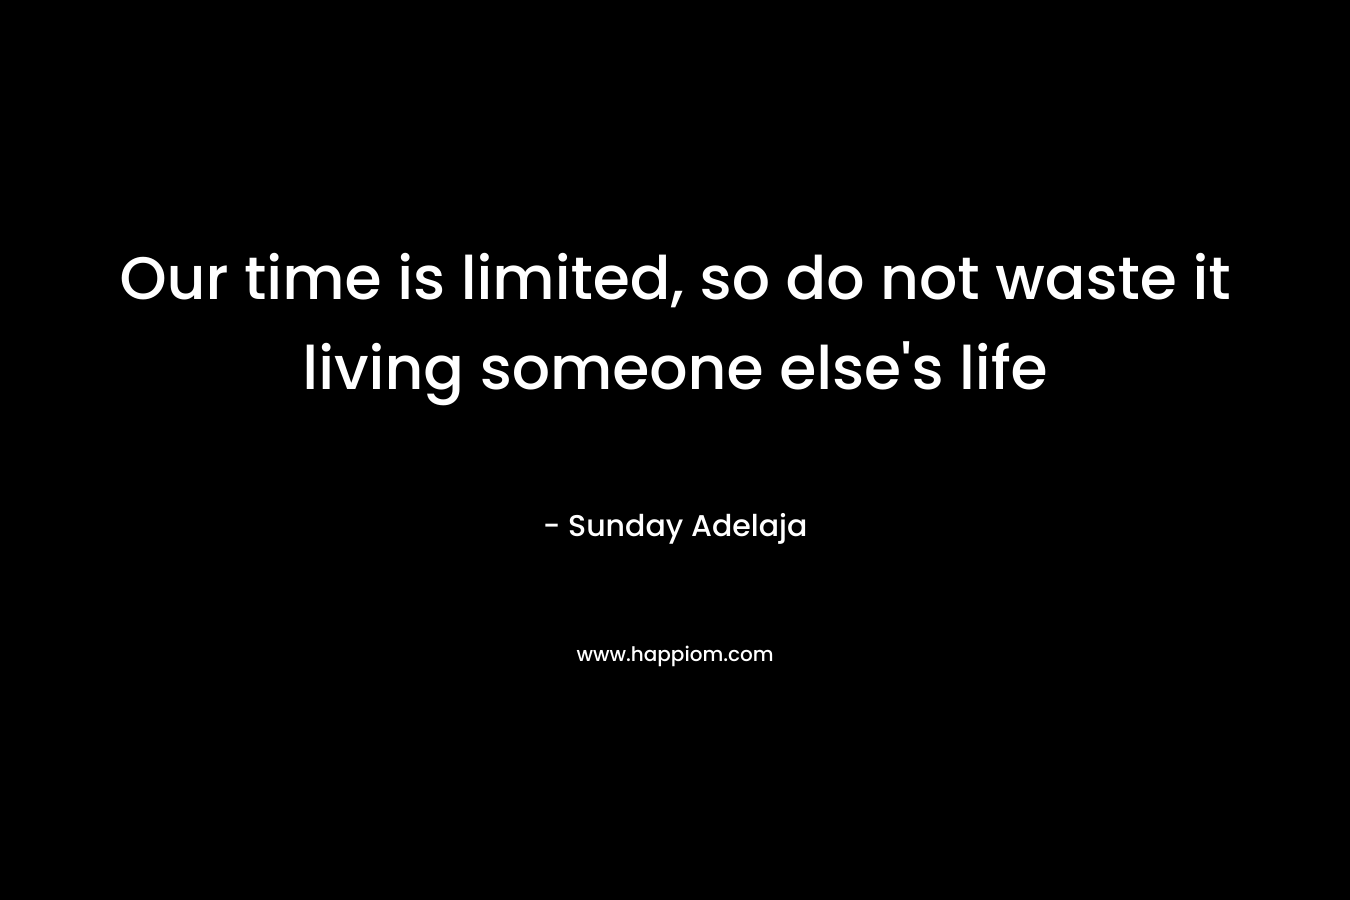 Our time is limited, so do not waste it living someone else's life